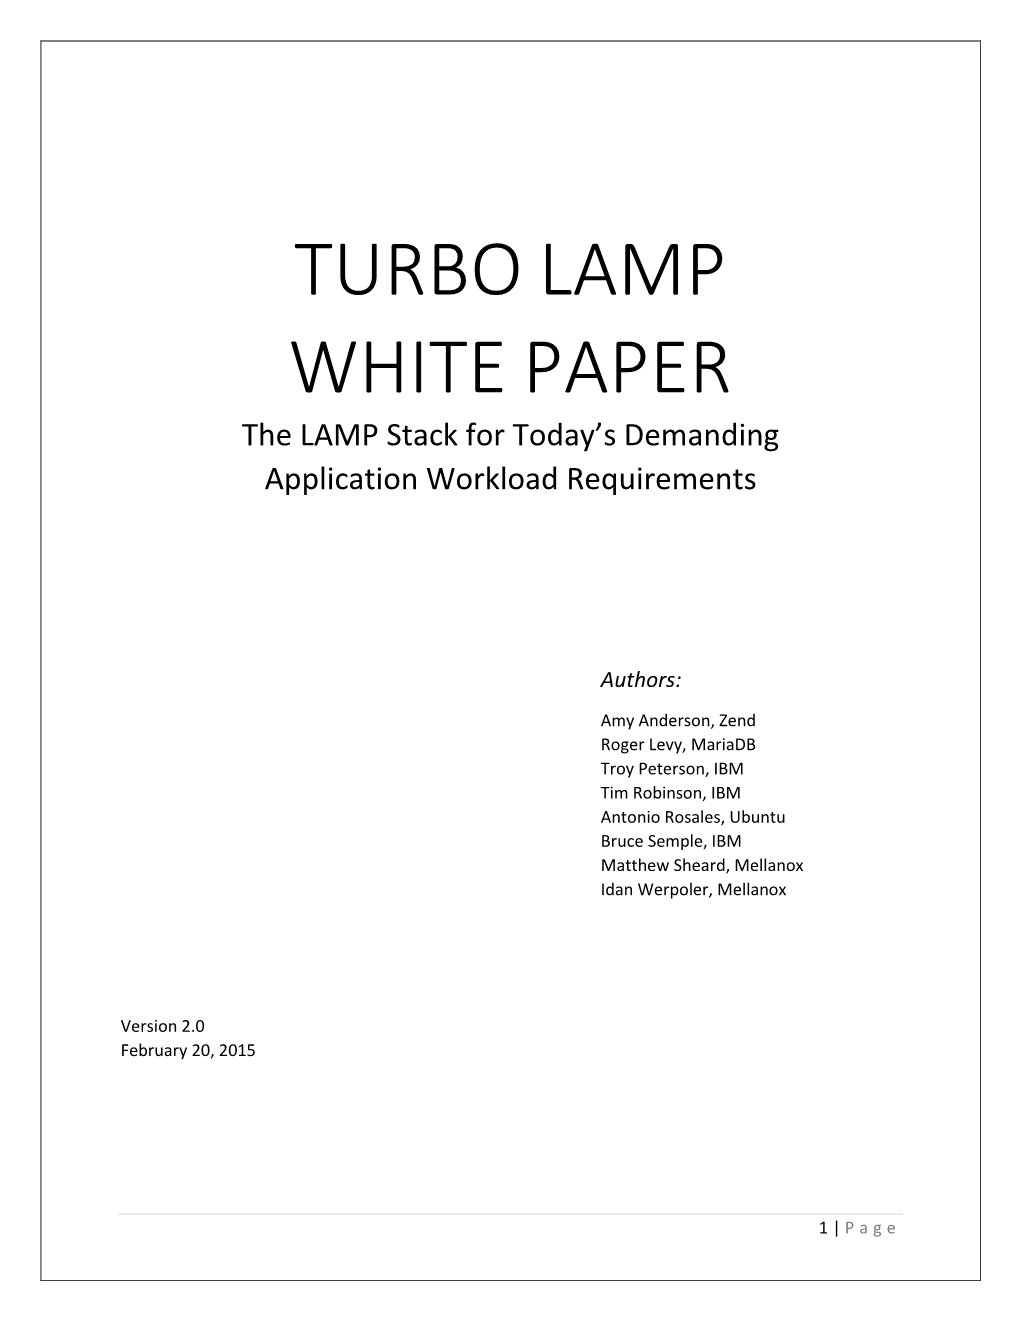 TURBO LAMP WHITE PAPER the LAMP Stack for Today’S Demanding Application Workload Requirements